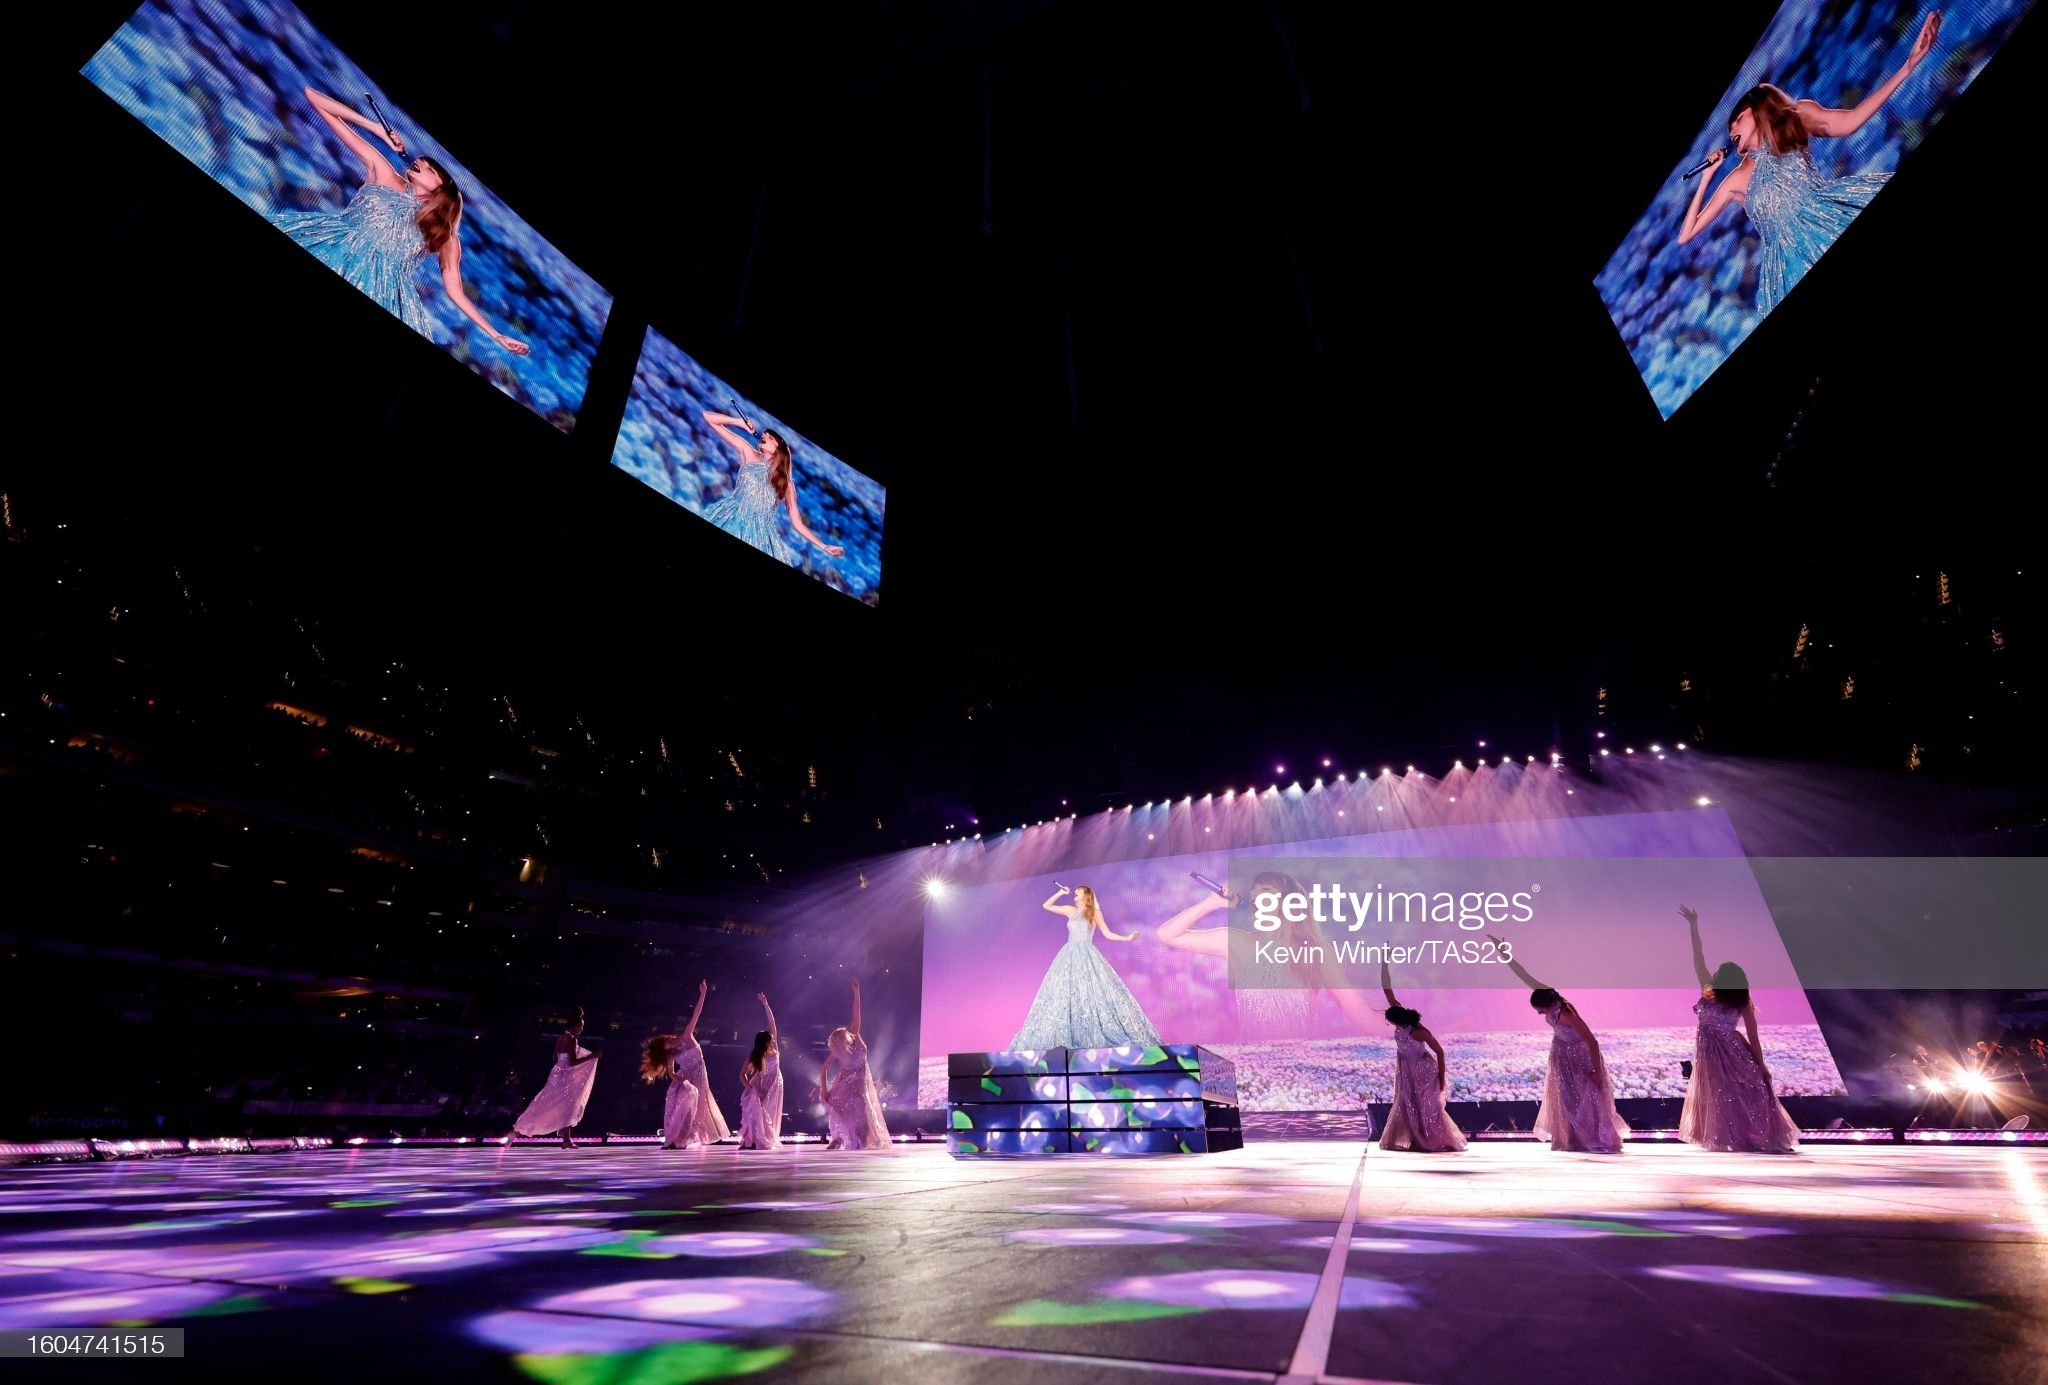 gettyimages-1604741515-2048x2048.jpg